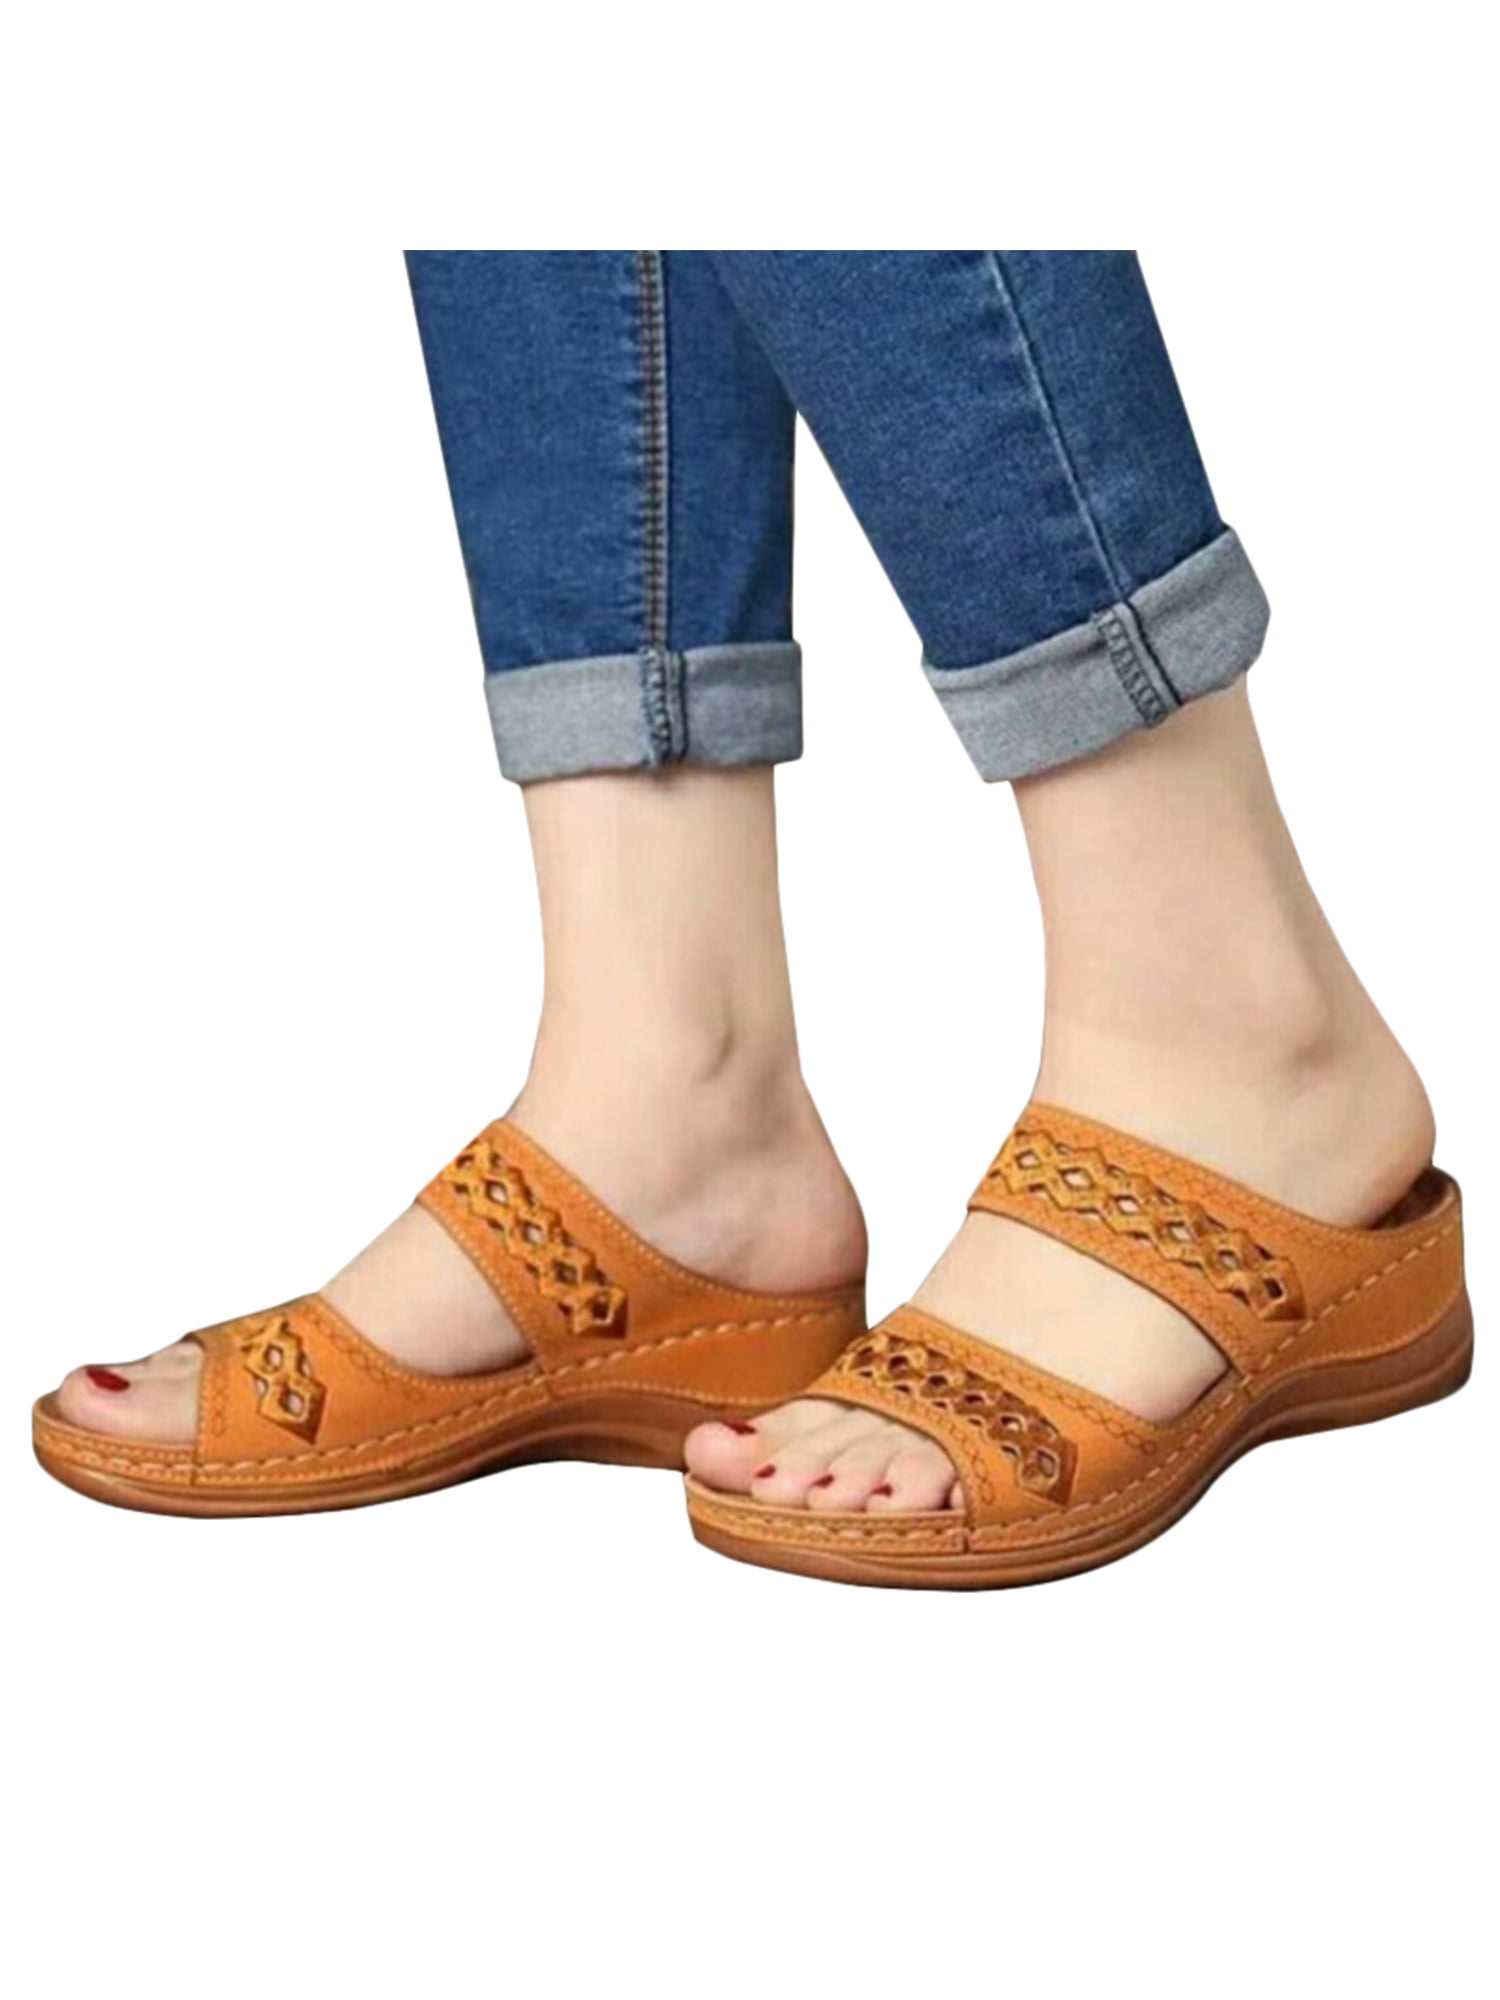 Leather Mules Shoes Ladies Flat Handmade Shoes Women Slipper Leather Clogs 